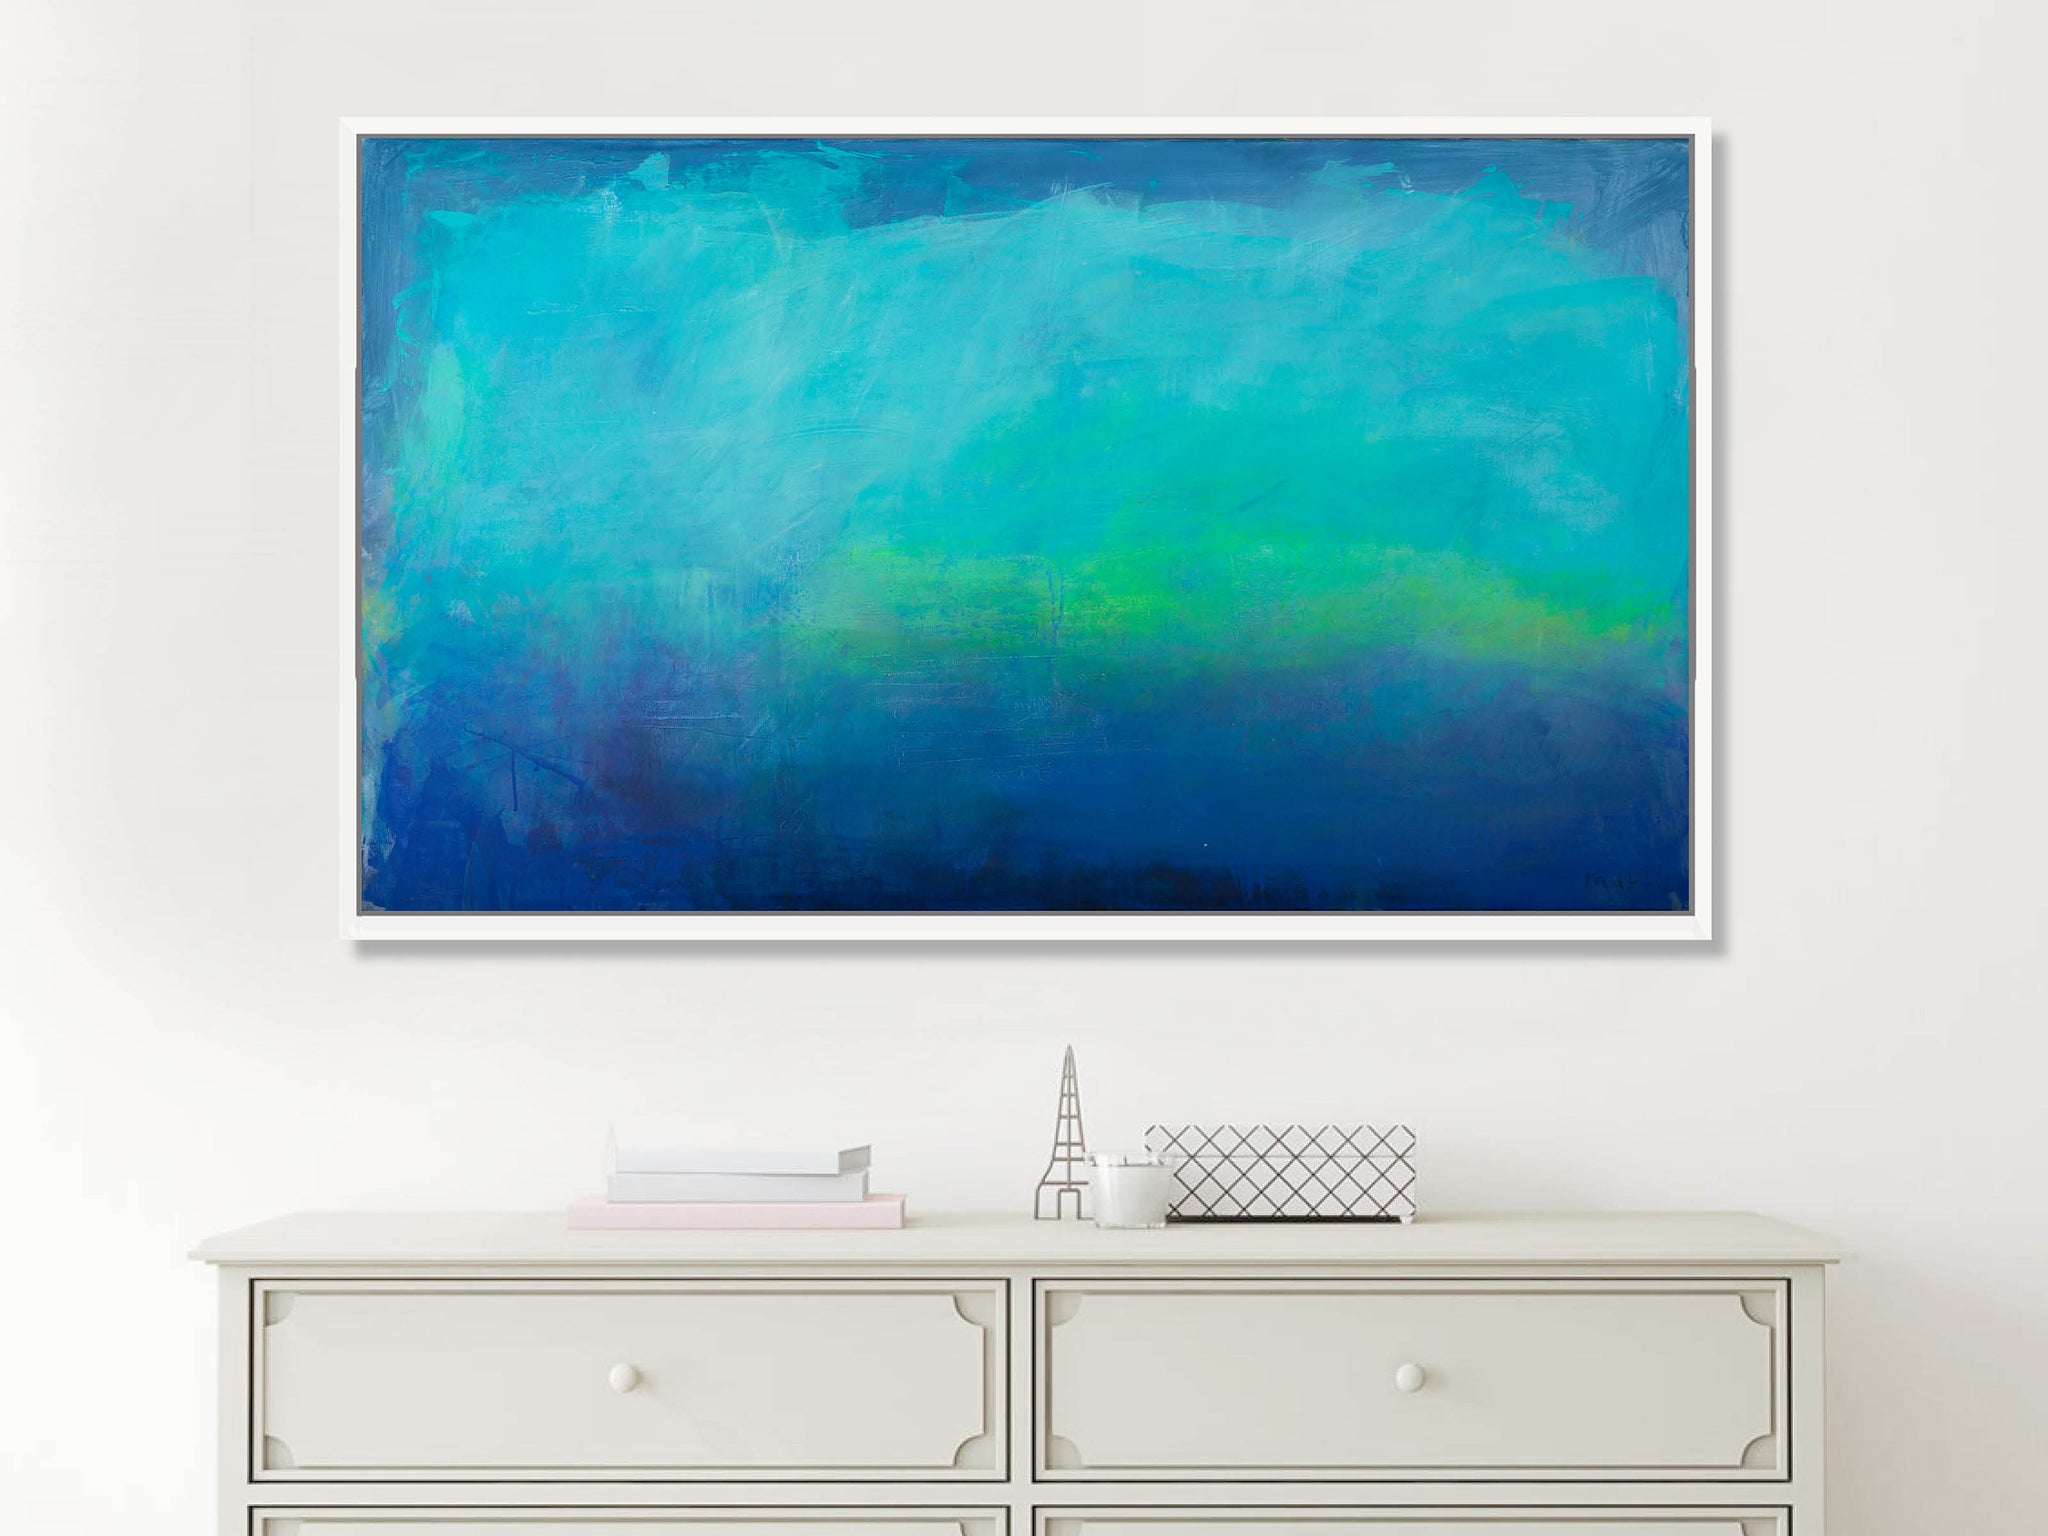 Turquoise large abstract wall art, Blue and Green abstract painting, wall decor gift, above bed decor wall art - camilomattis.com